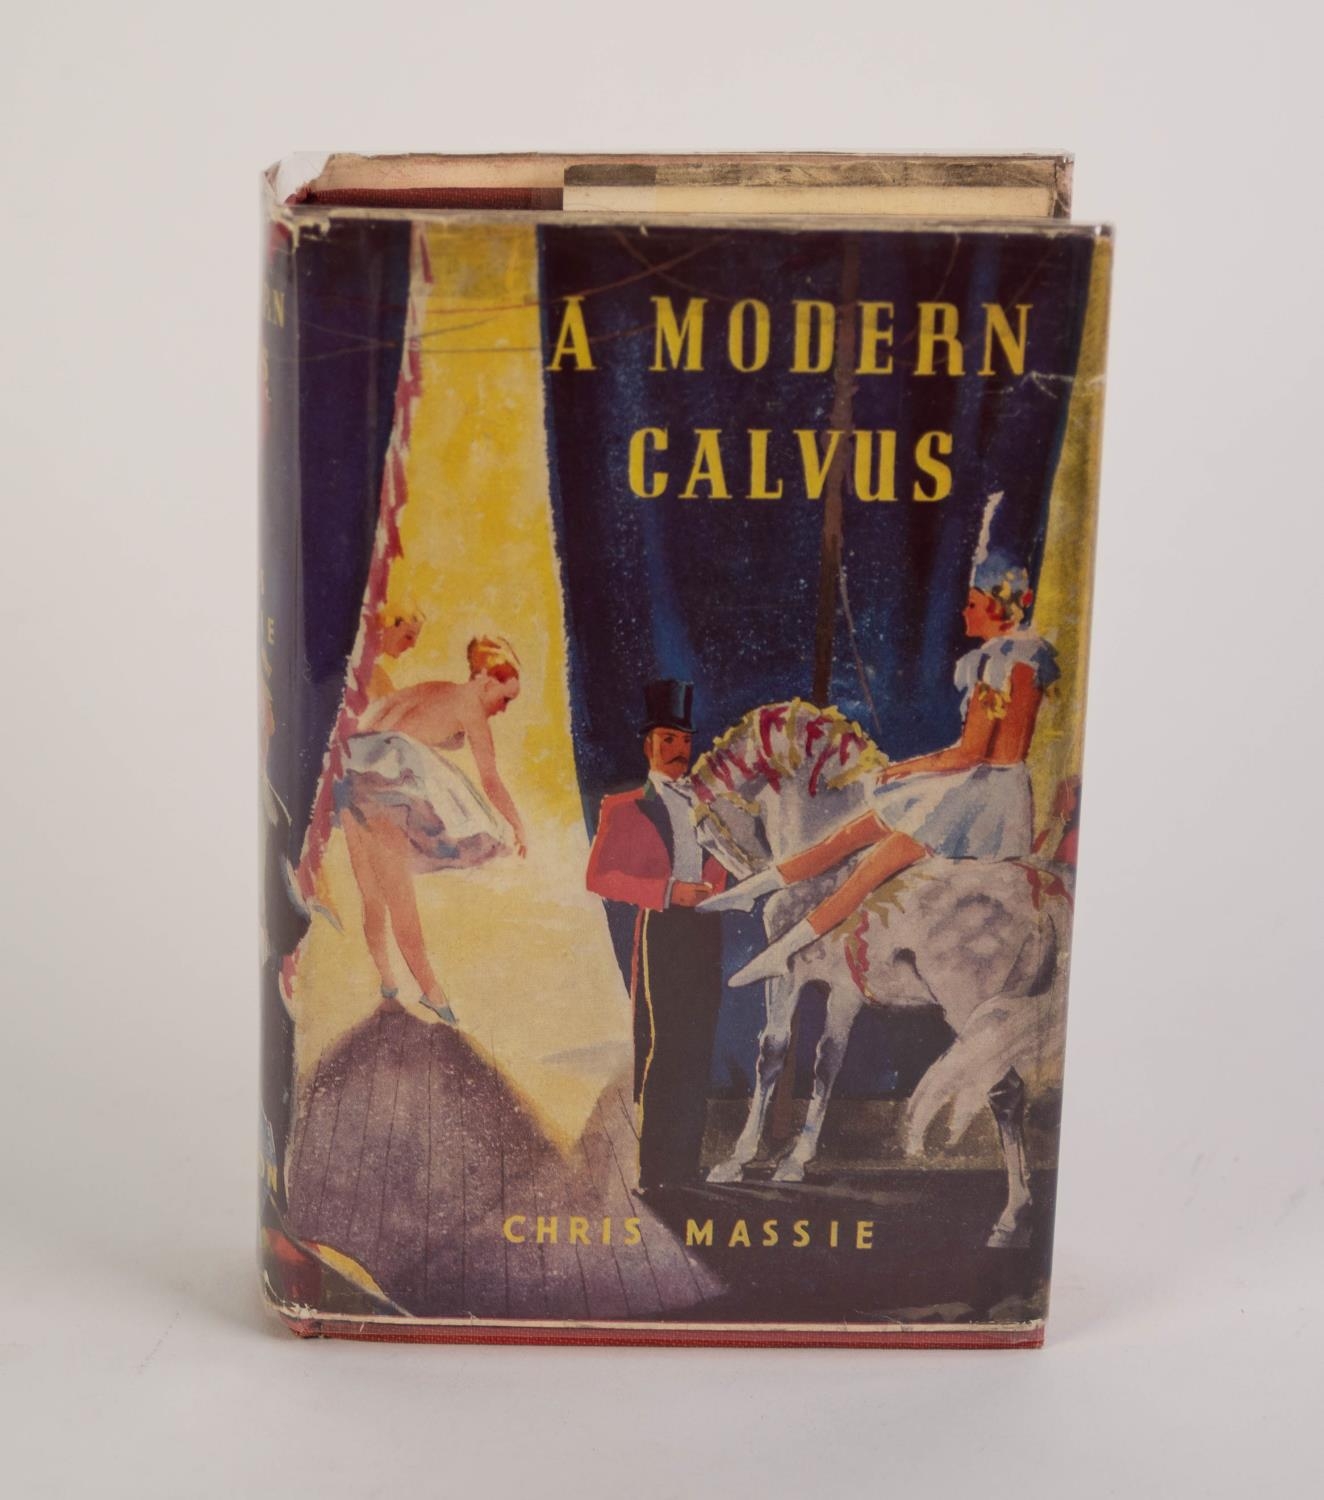 OUTSIDER FICTION. Chris Massie - A Modern Calvus, pub Sampson Low, 1st Ed 1936 with dj. Obscure - Image 2 of 5